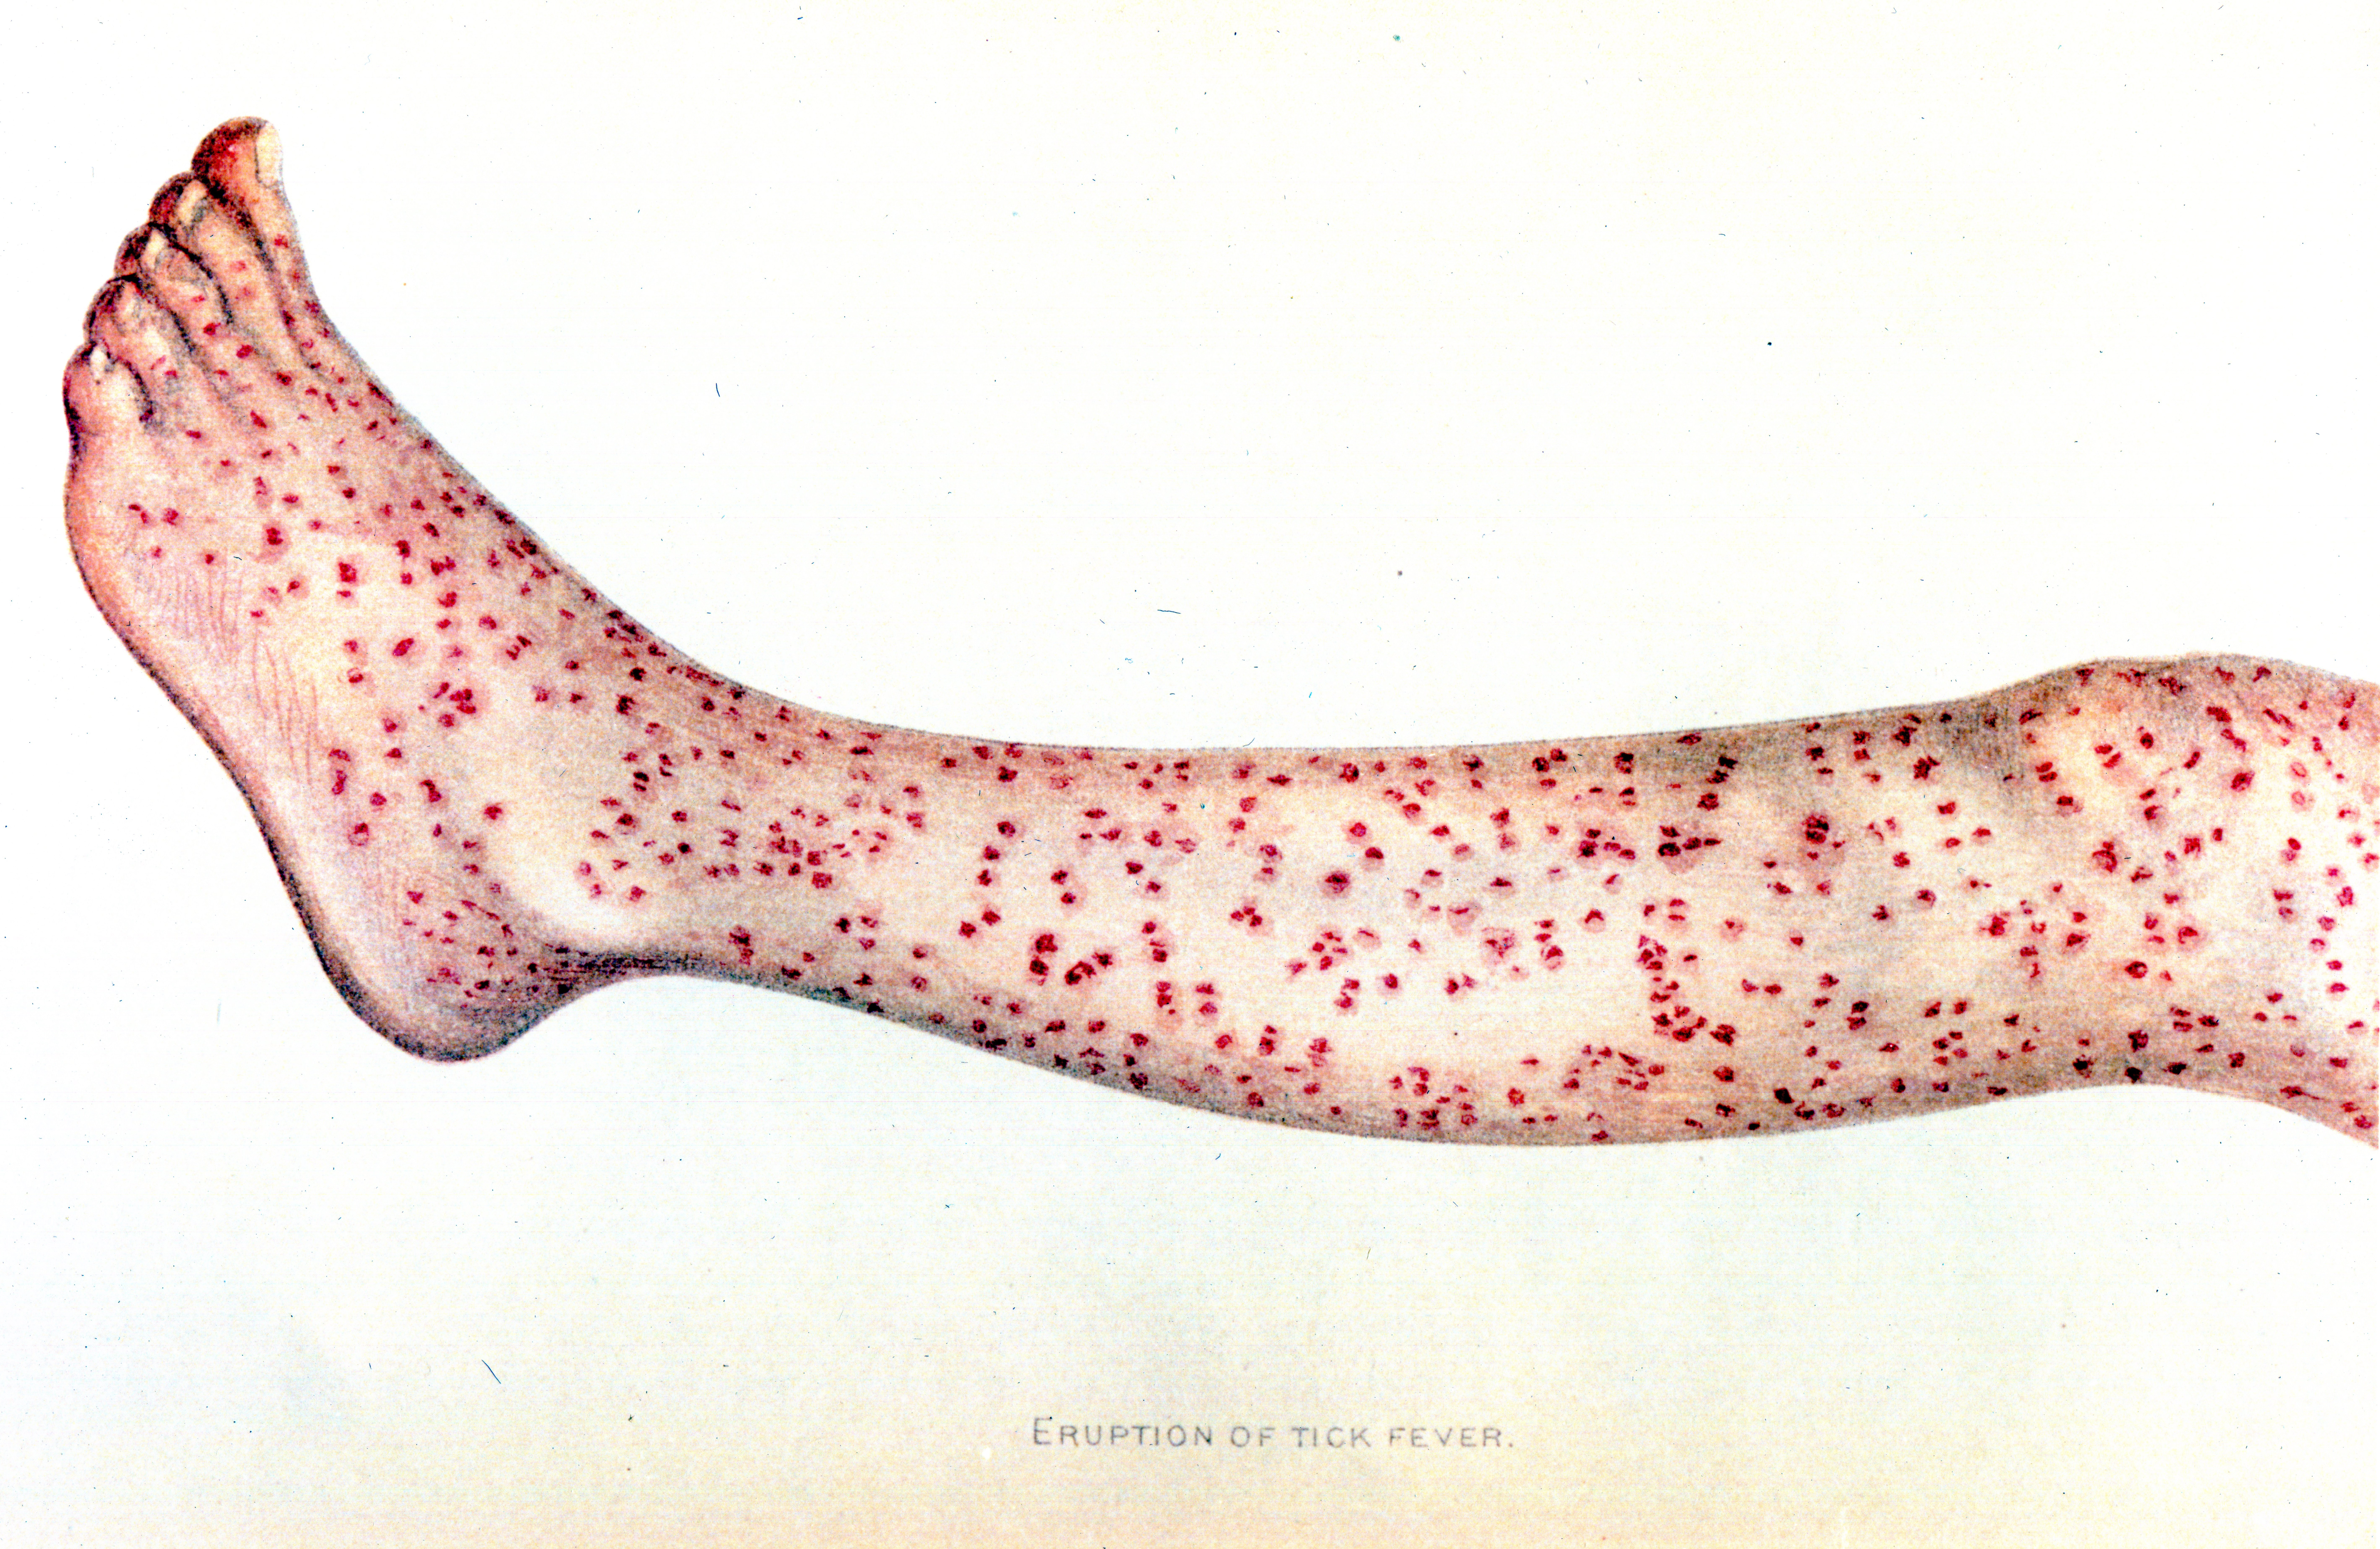 A drawing of a leg covered with Rocky Mountain spotted fever rash, which is red blisters over the leg and entire foot.